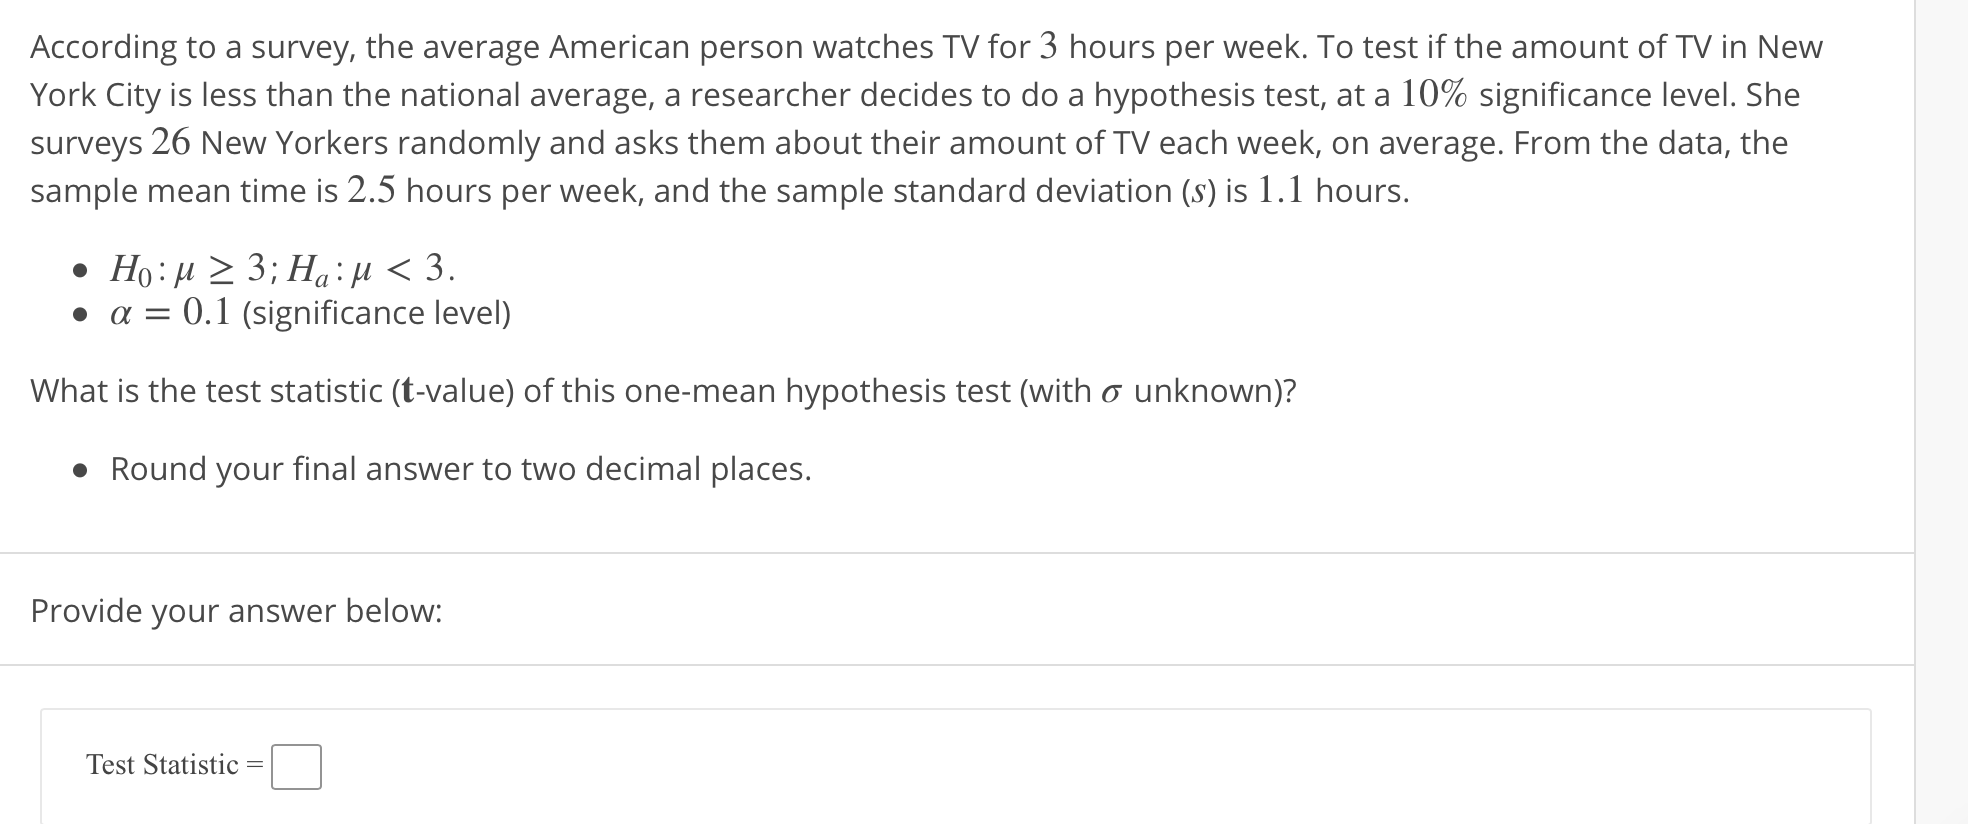 According to a survey, the average American person watches TV for 3 hours per week. To test if the amount of TV in New
York City is less than the national average, a researcher decides to do a hypothesis test, at a 10% significance level. She
surveys 26 New Yorkers randomly and asks them about their amount of TV each week, on average. From the data, the
sample mean time is 2.5 hours per week, and the sample standard deviation (s) is 1.1 hours
a0.1 (significance level)
What is the test statistic (t-value) of this one-mean hypothesis test (with ơ unknown)?
Round your final answer to two decimal places
Provide your answer below
Test Statistic-
